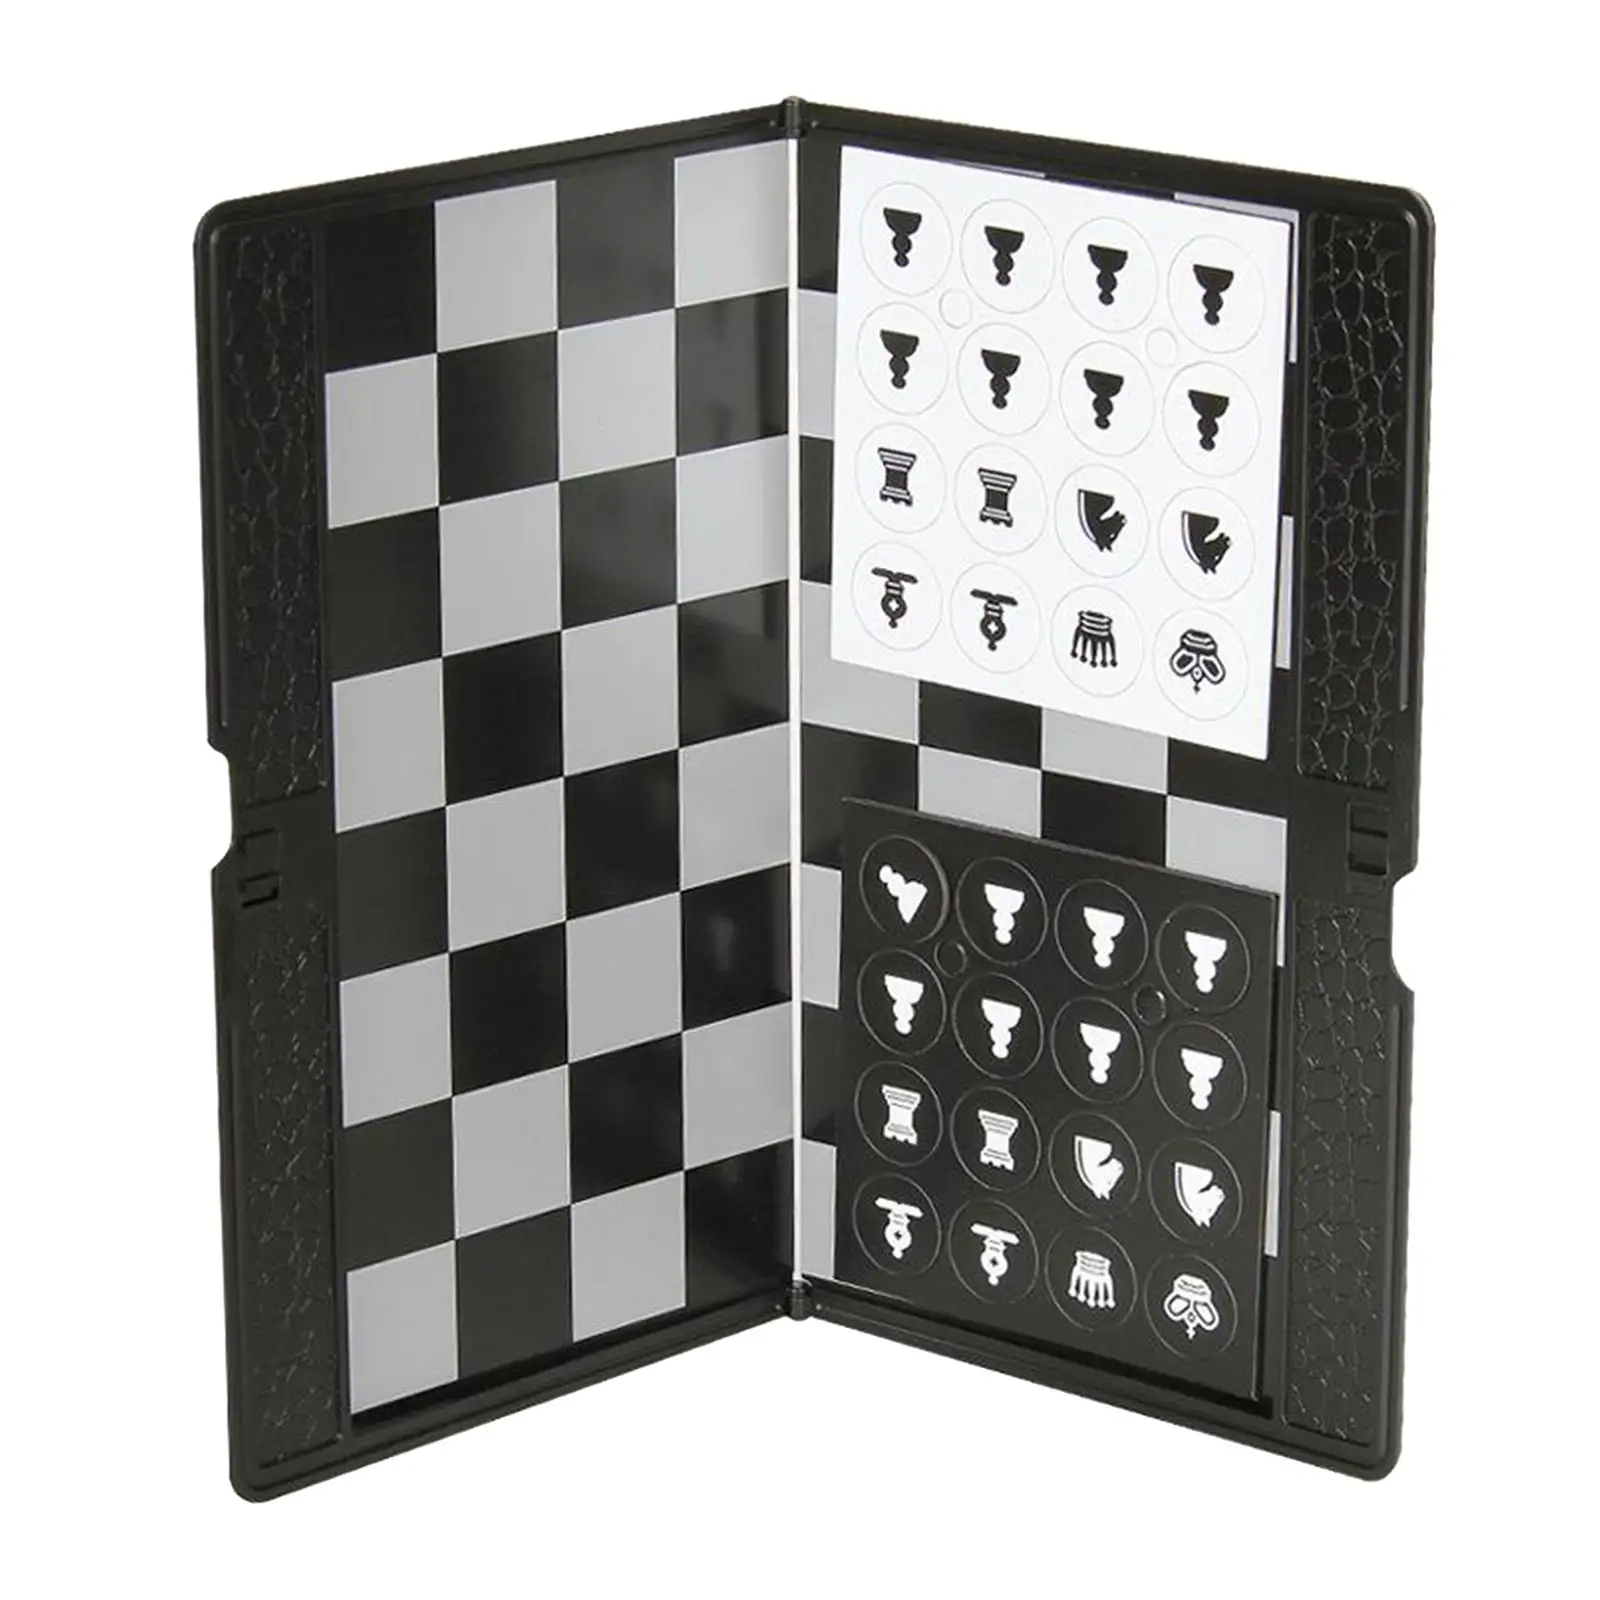 Foldable Chessboard Mini Chess Set Travel Chess Board Game for Camping